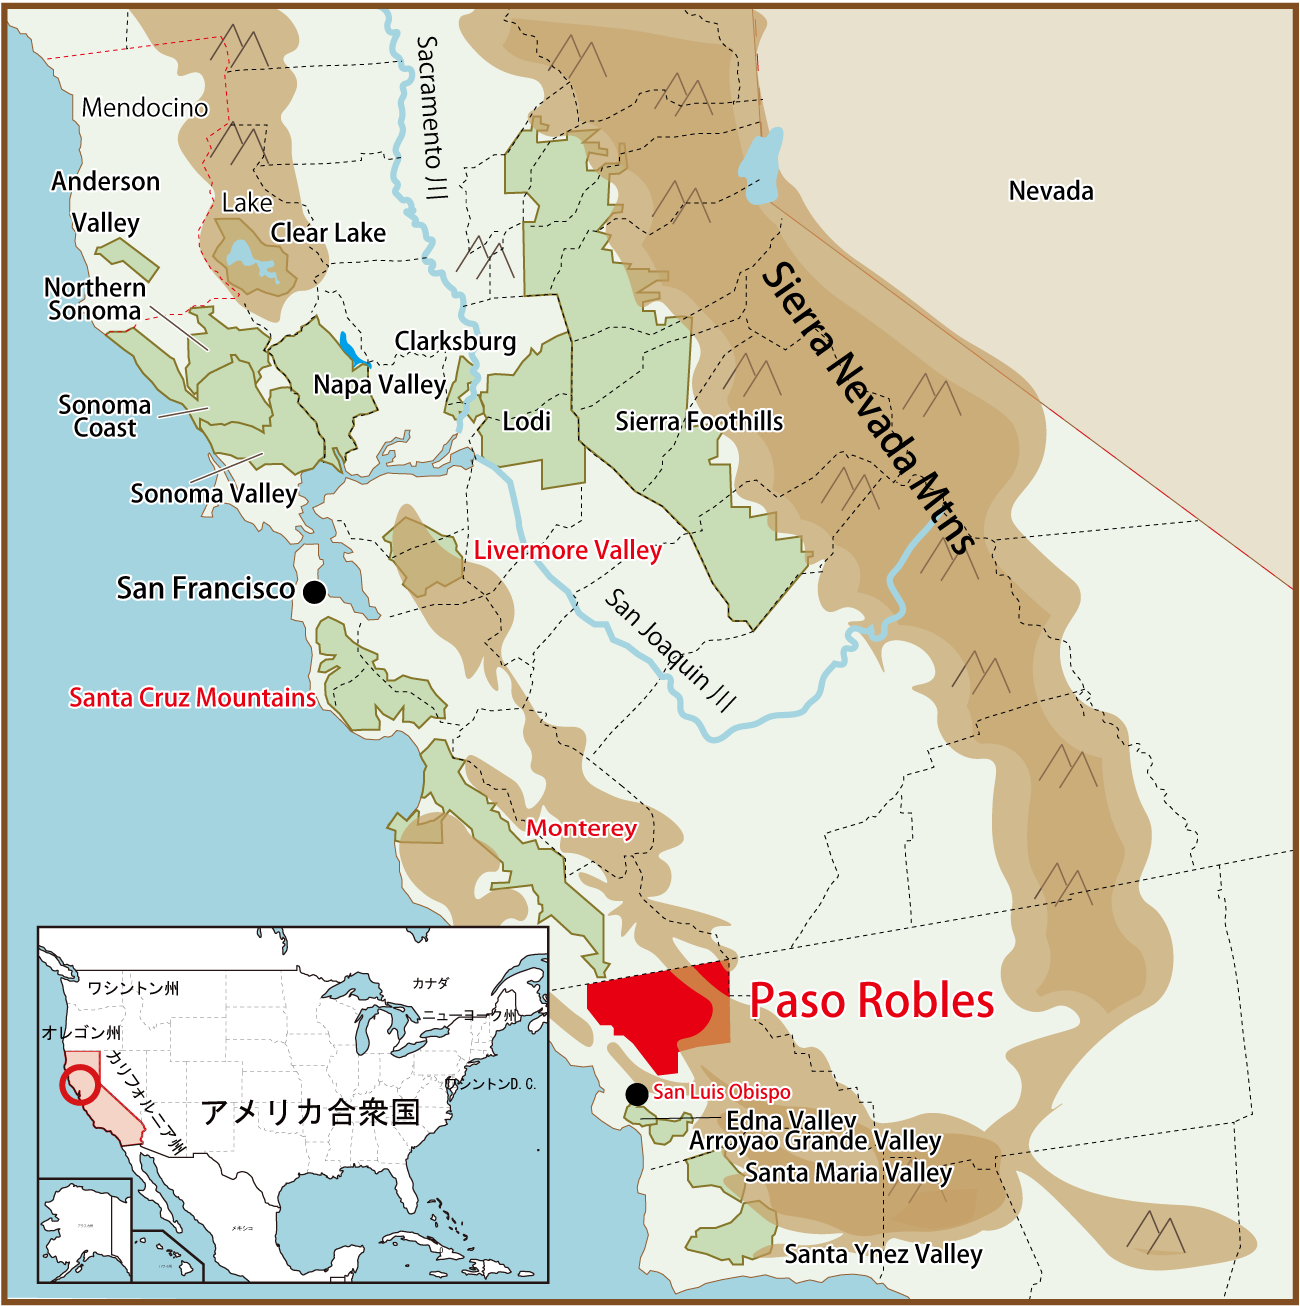 Paso Robles（パソ・ロブレス）